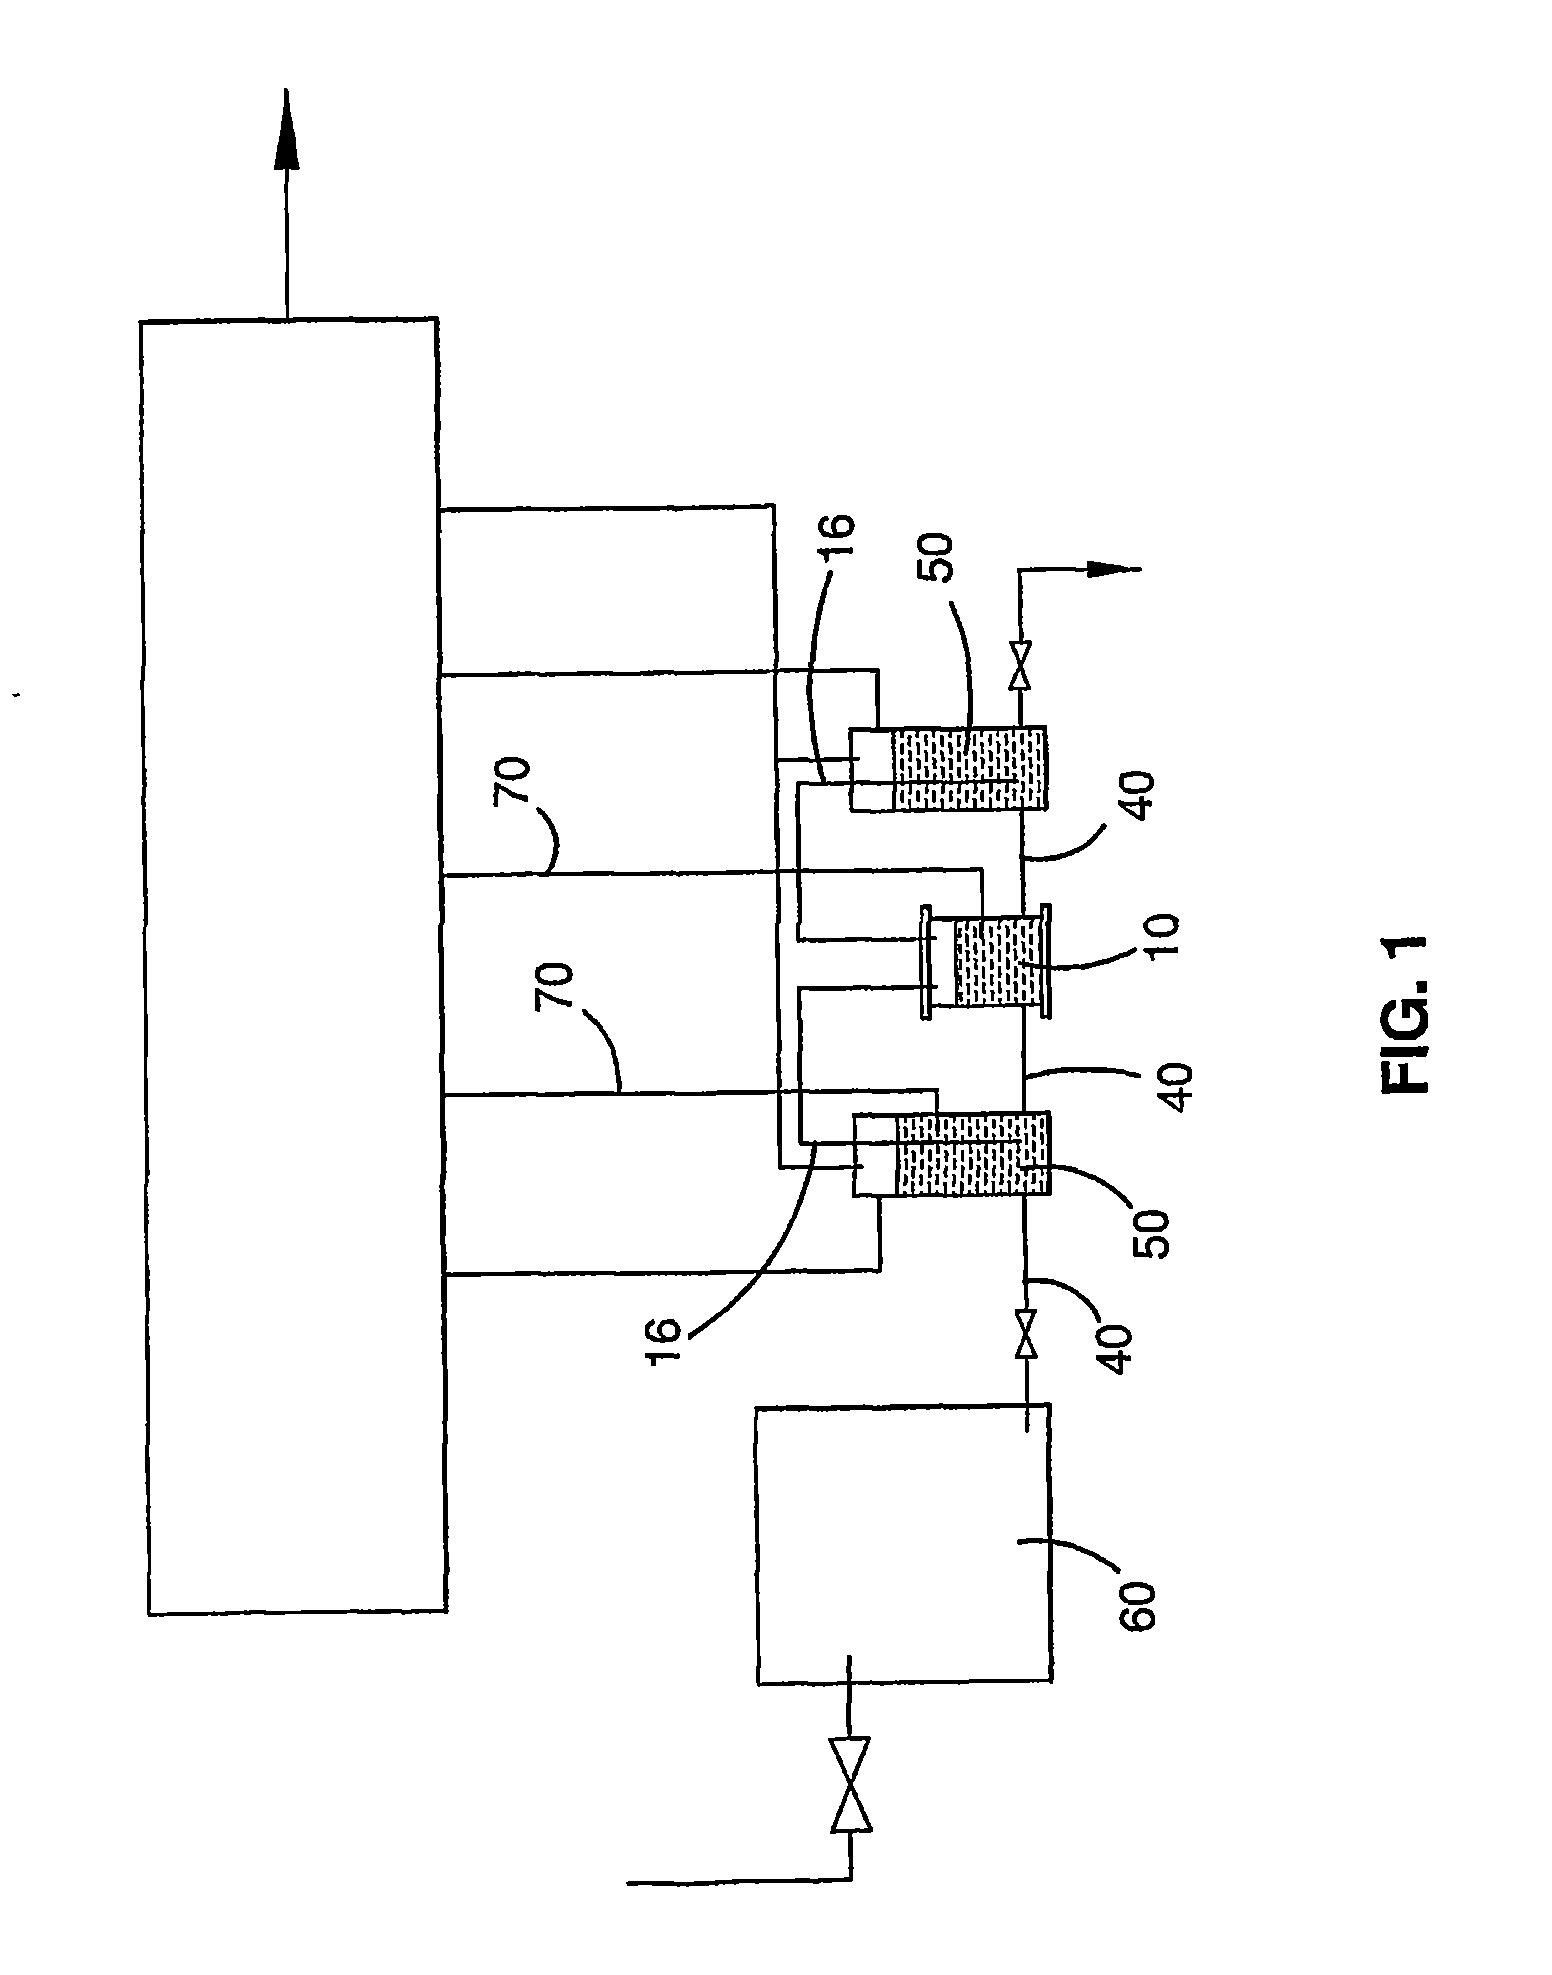 Method and apparatus for producing hydrogen and oxygen gas